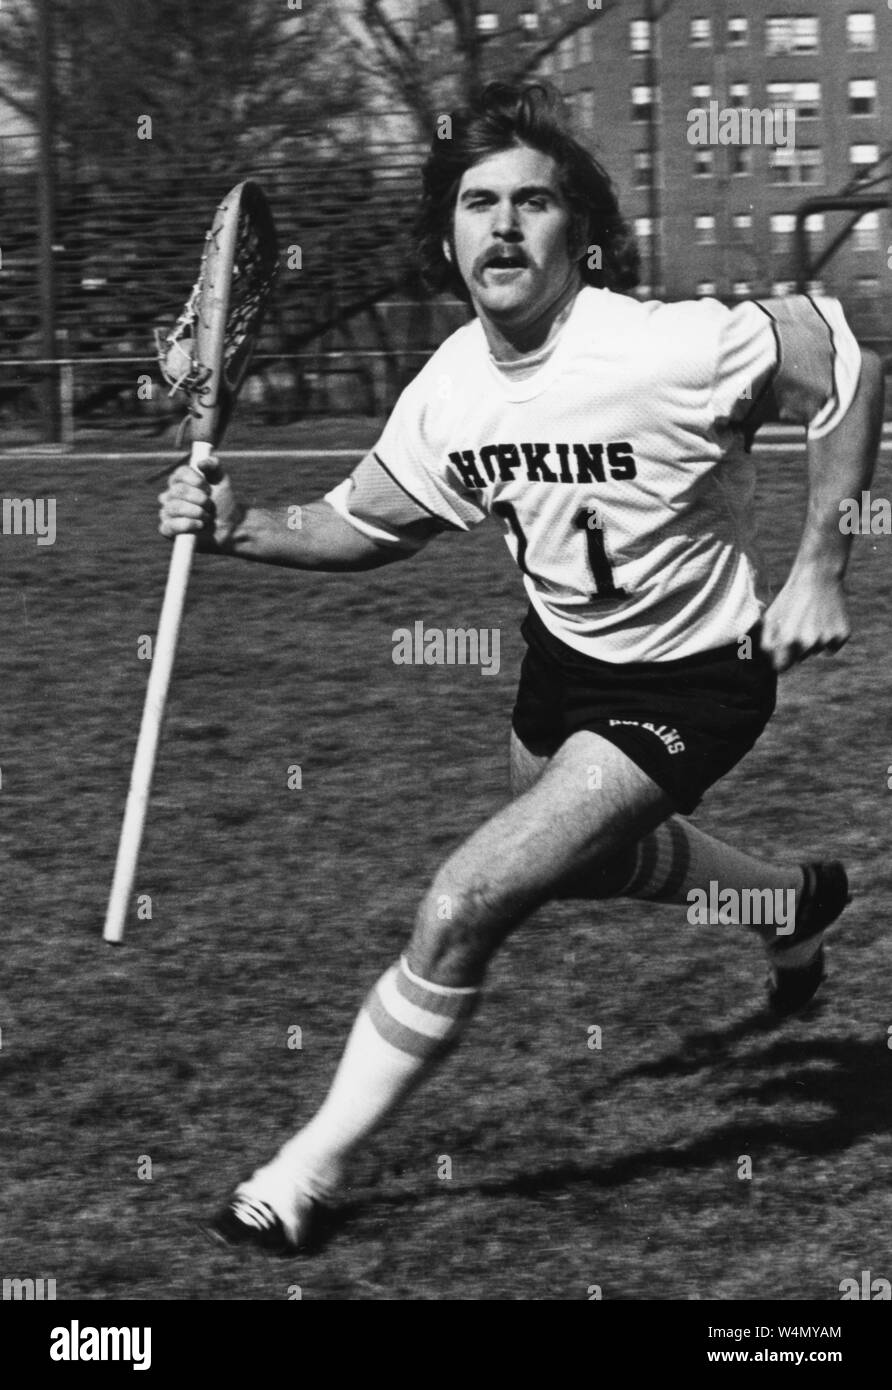 Johns Hopkins lacrosse player Bill Nolan, running with his stick in his right hand, wearing shorts and a Hopkins jersey, with a serious facial expression, 1970. From the Historical Photographs Collection. () Stock Photo